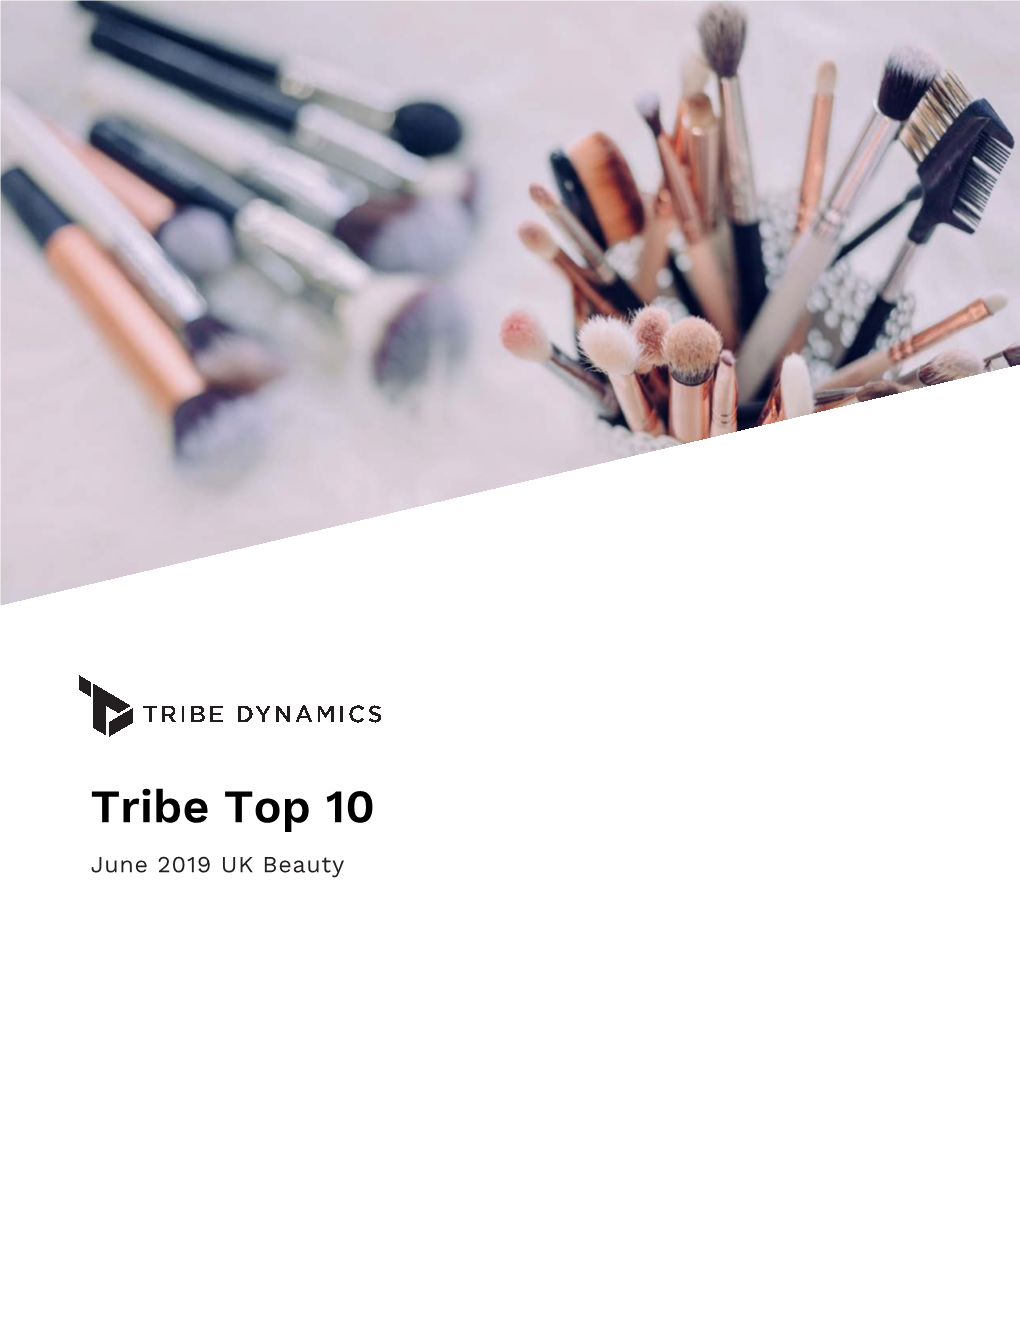 Tribe Top 10 June 2019 UK Beauty Introduction